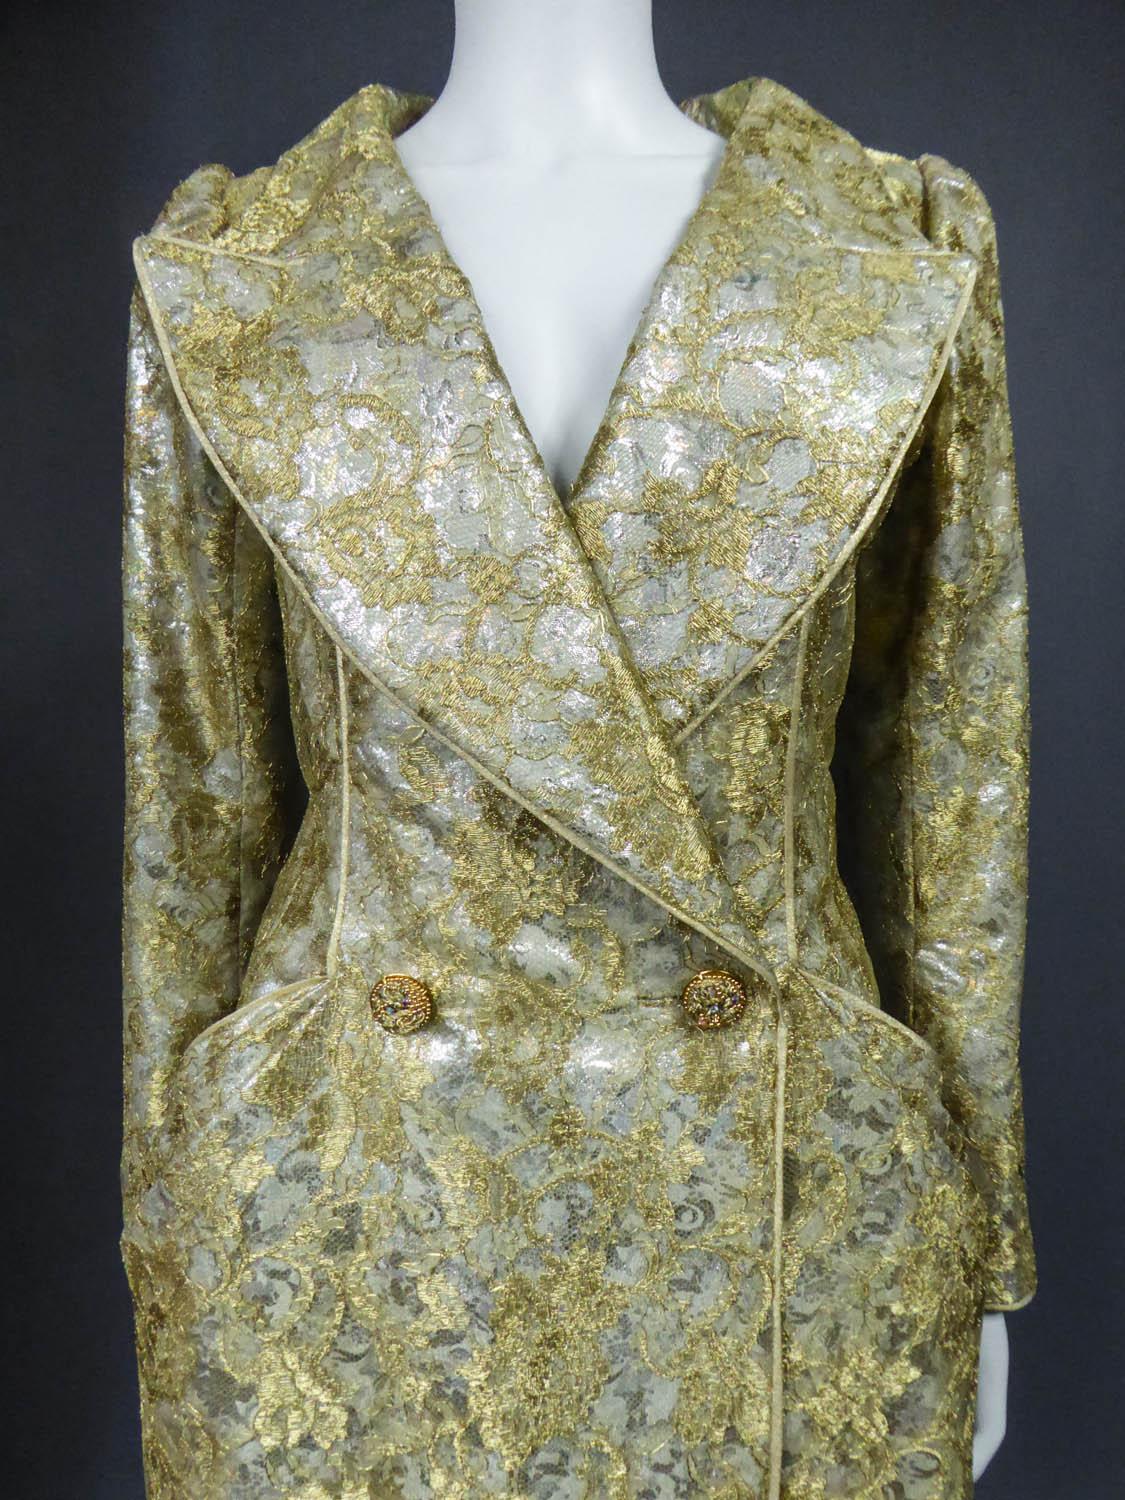 Circa 1990
France

Haute Couture evening coat dress by Emanuel Ungaro from the 1990s. Silver lamé with floral patterns covered with gold lace overlay. Wide collar with plunging cleavage on the chest, hips marked by two side pockets with three